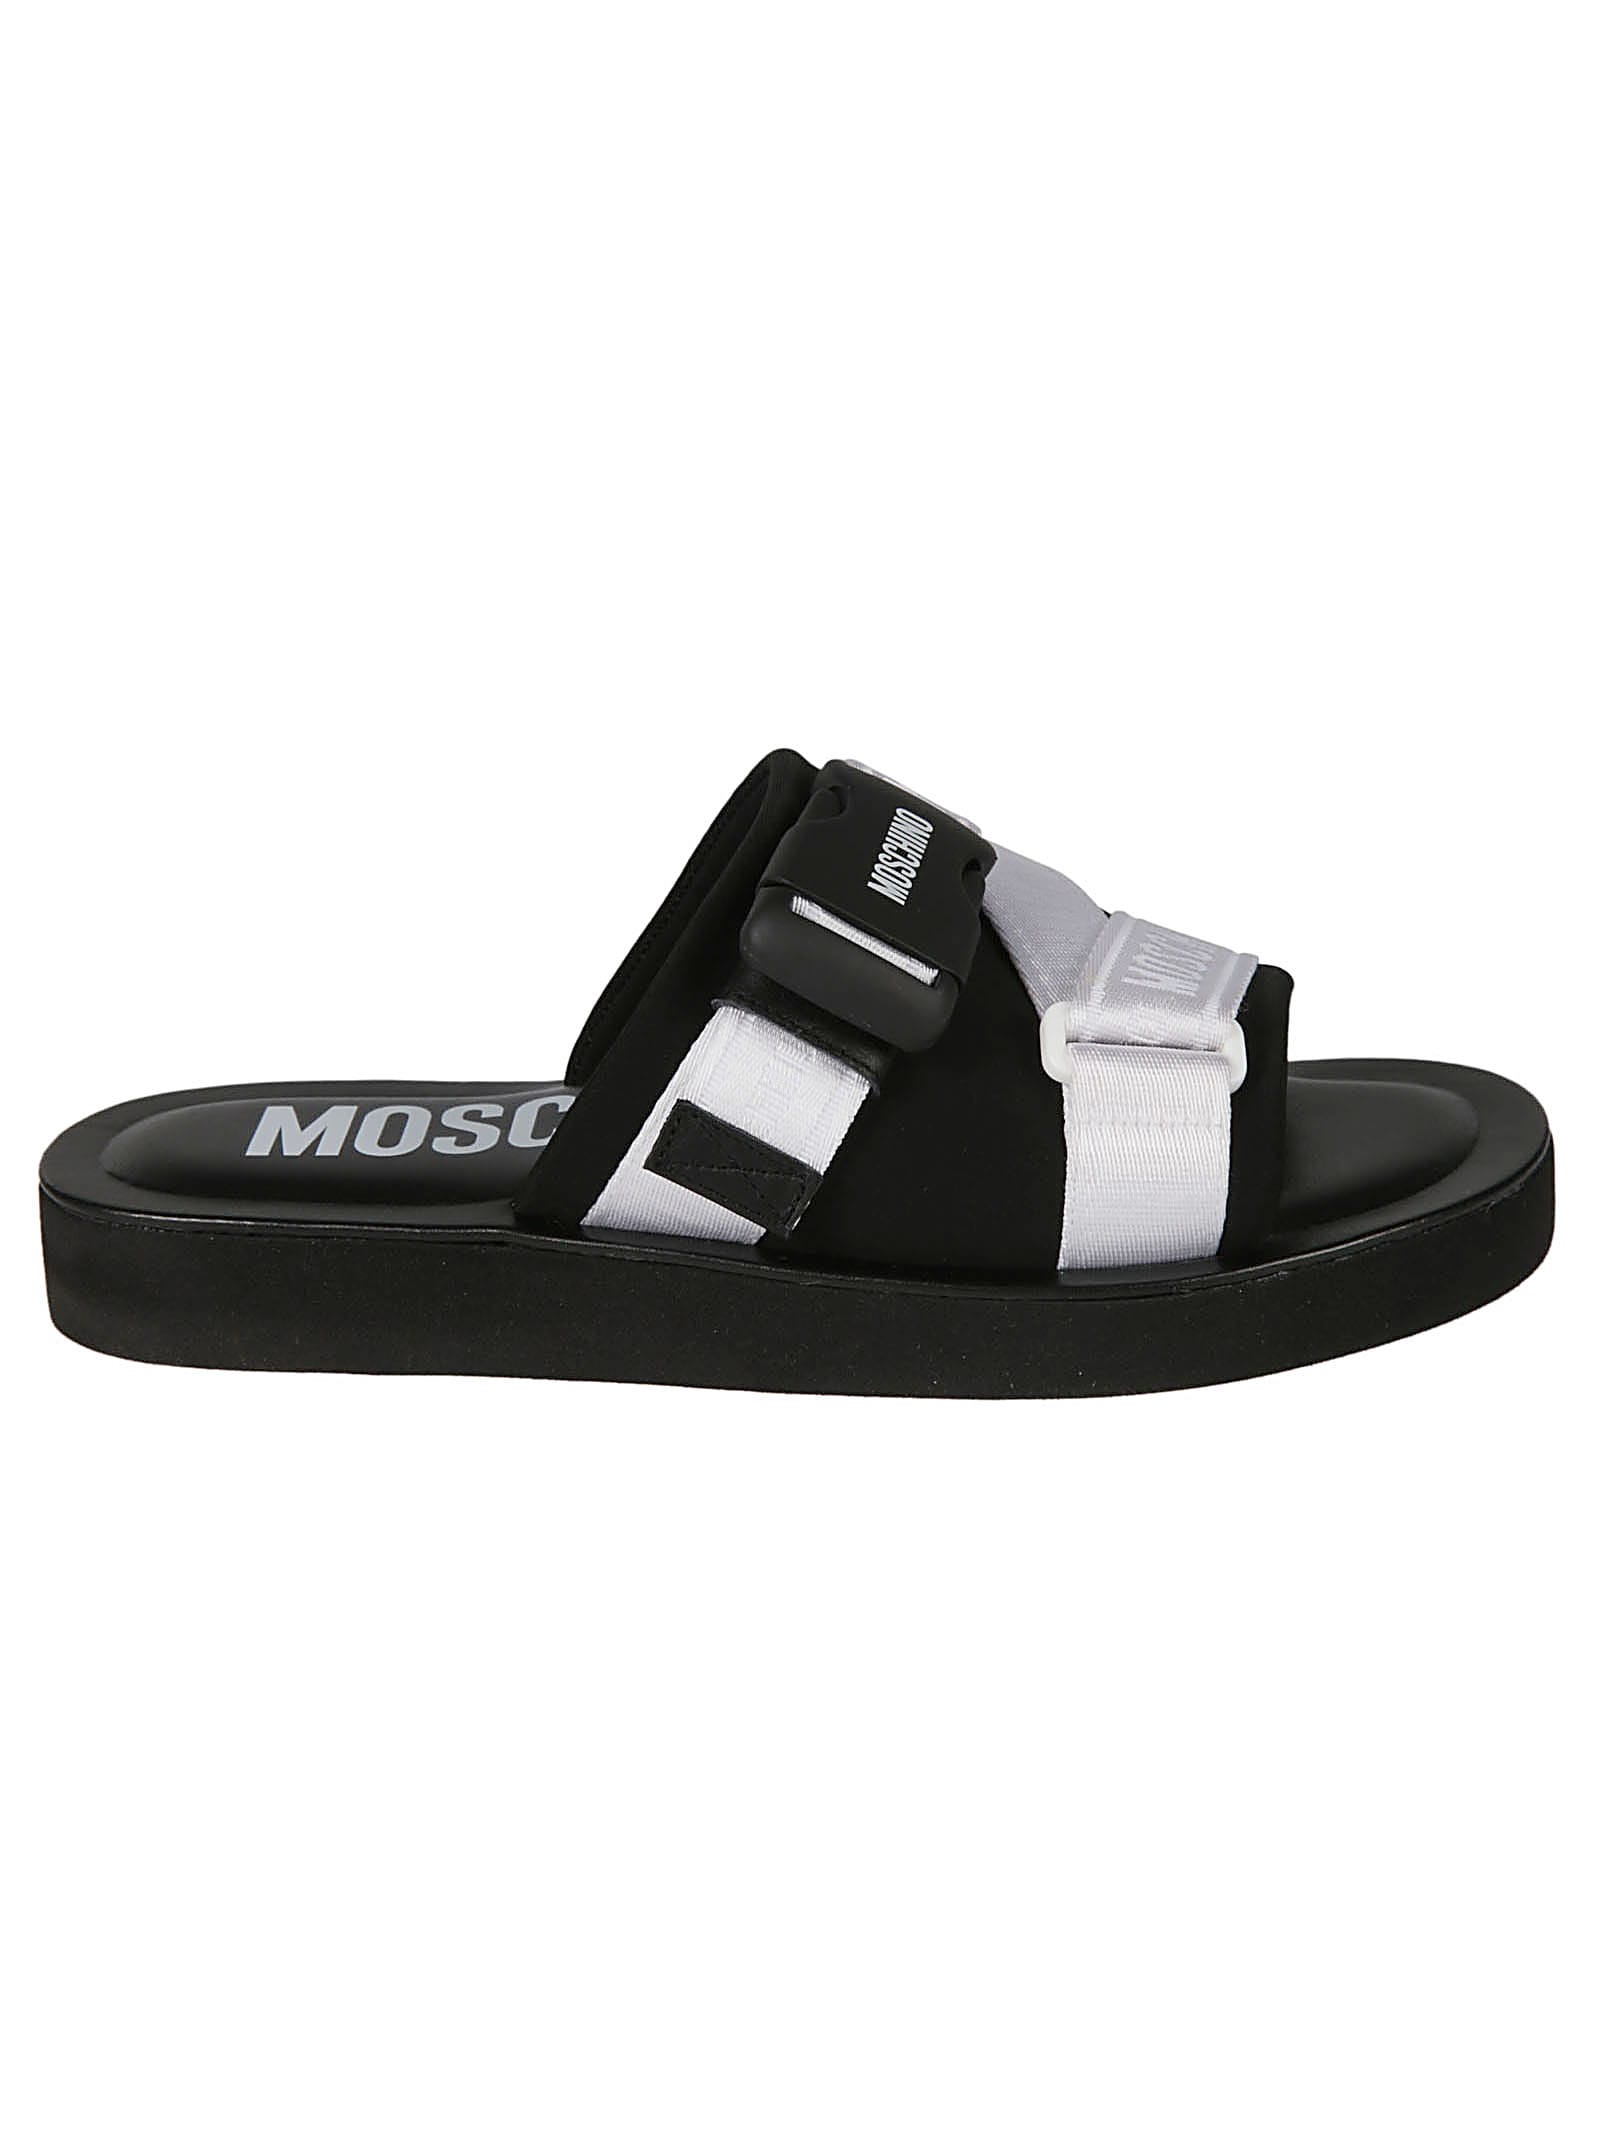 Buy Moschino Logo Strap Buckled Sandals online, shop Moschino shoes with free shipping